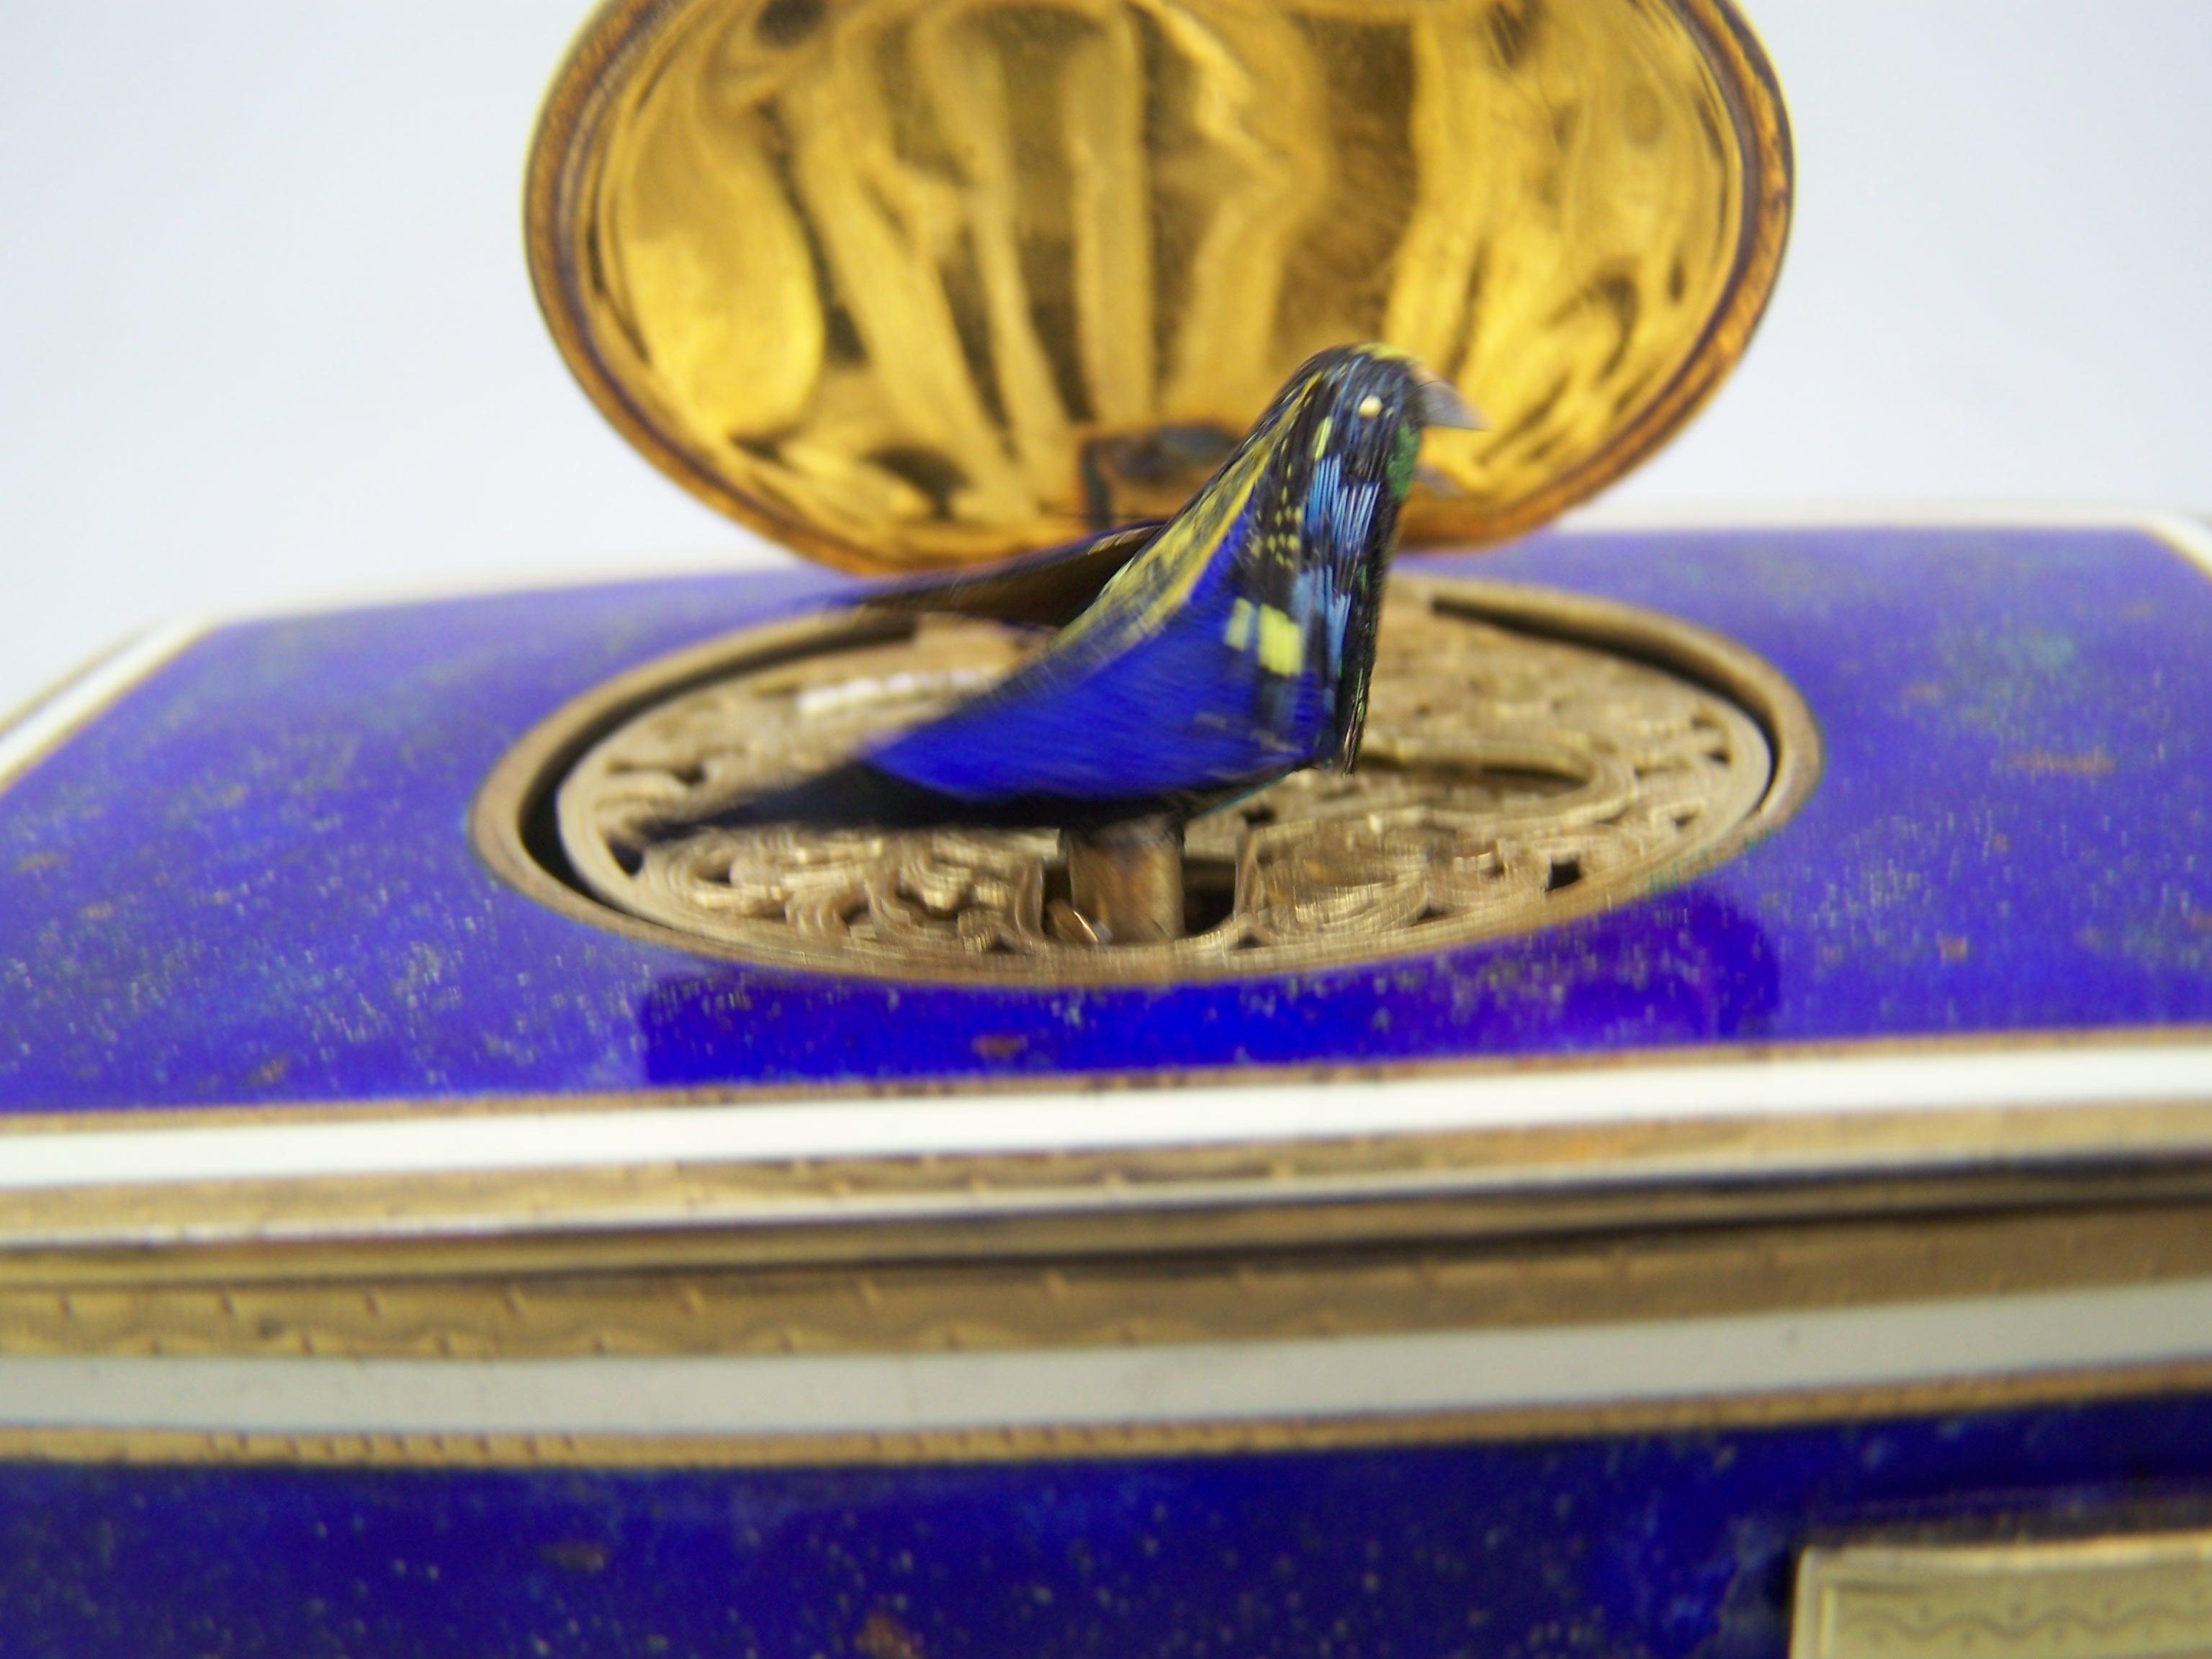 Singing bird box by K Griesbaum in guilded case and blue-goldflaked enamel 4